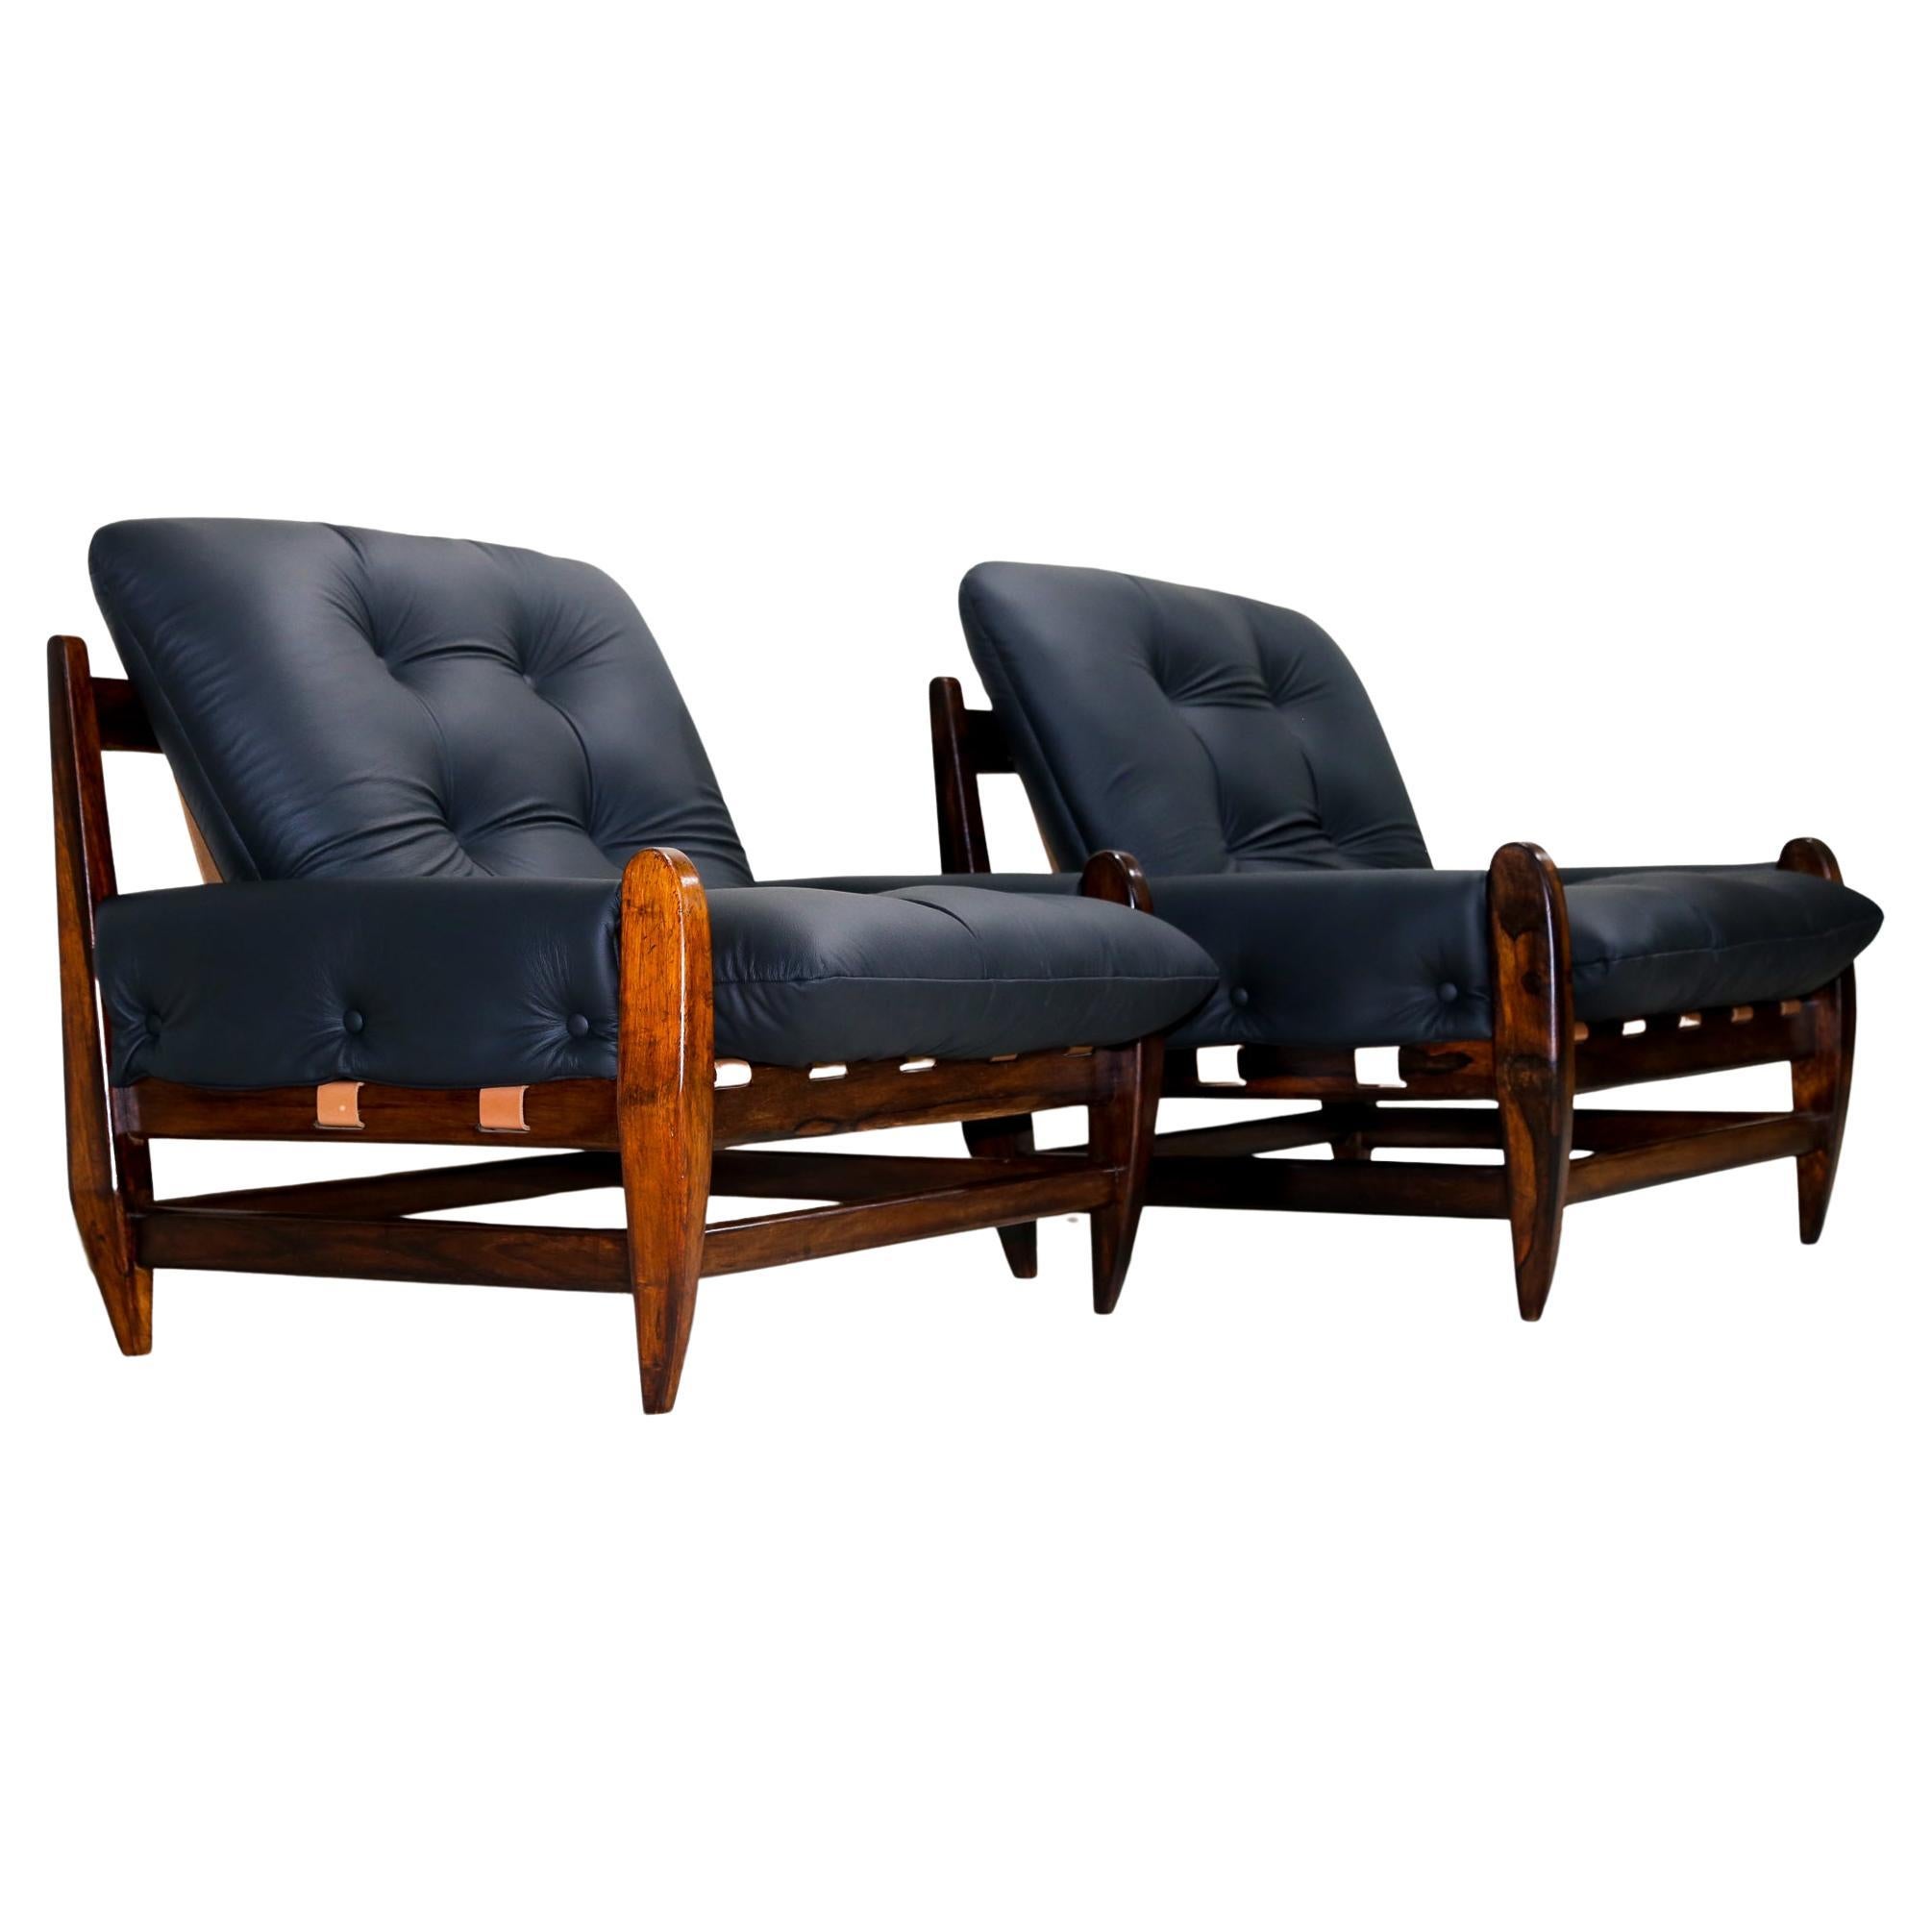 Hand-Crafted Brazilian Modern Armchairs in Hardwood & Black Leather, Jean Gillon, 1960 For Sale